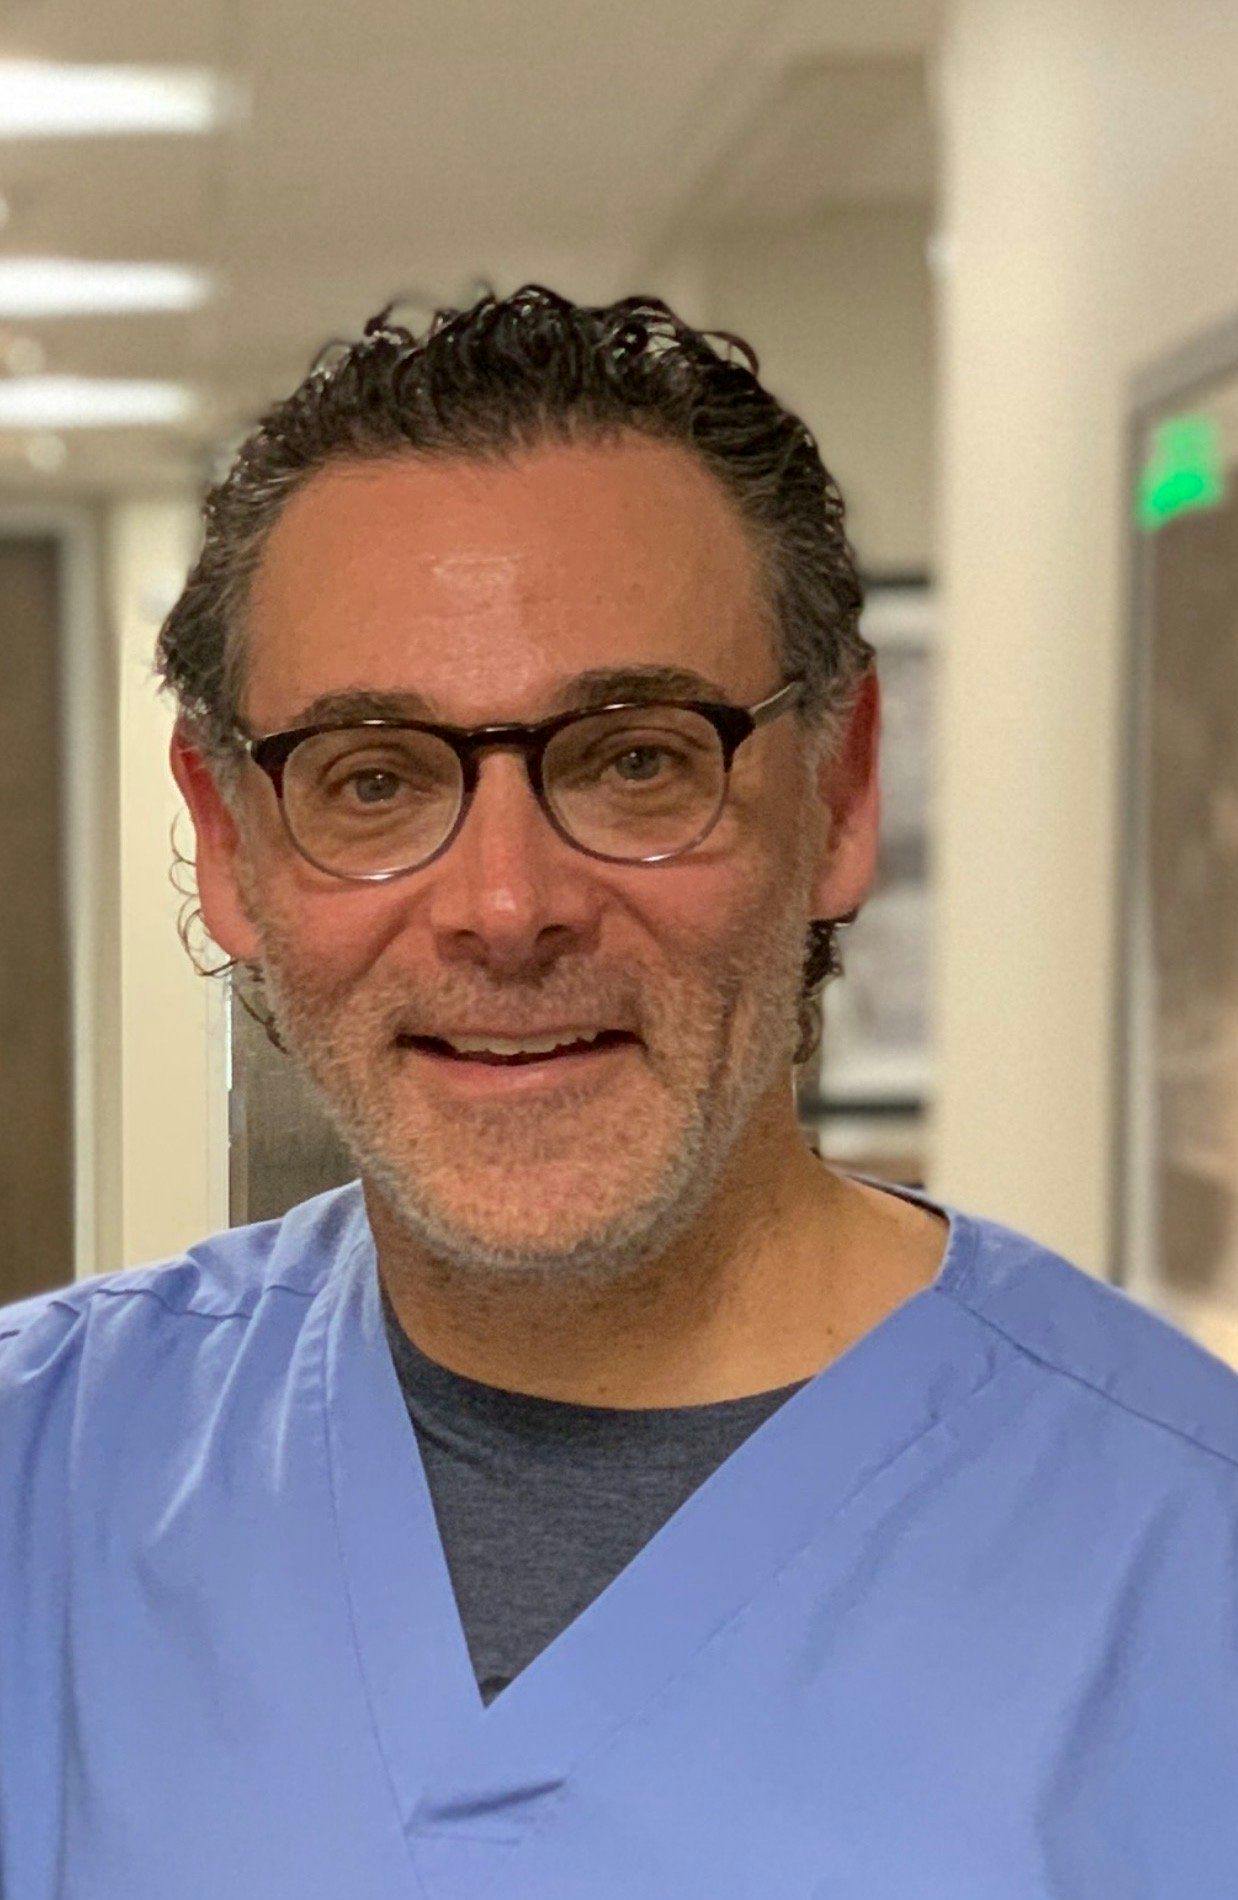 Joel Cohen, M.D., director of AboutSkin Dermatology & DermSurgery, Greenwood Village and Lone Tree, Colo., and one of the DREAM study investigators.